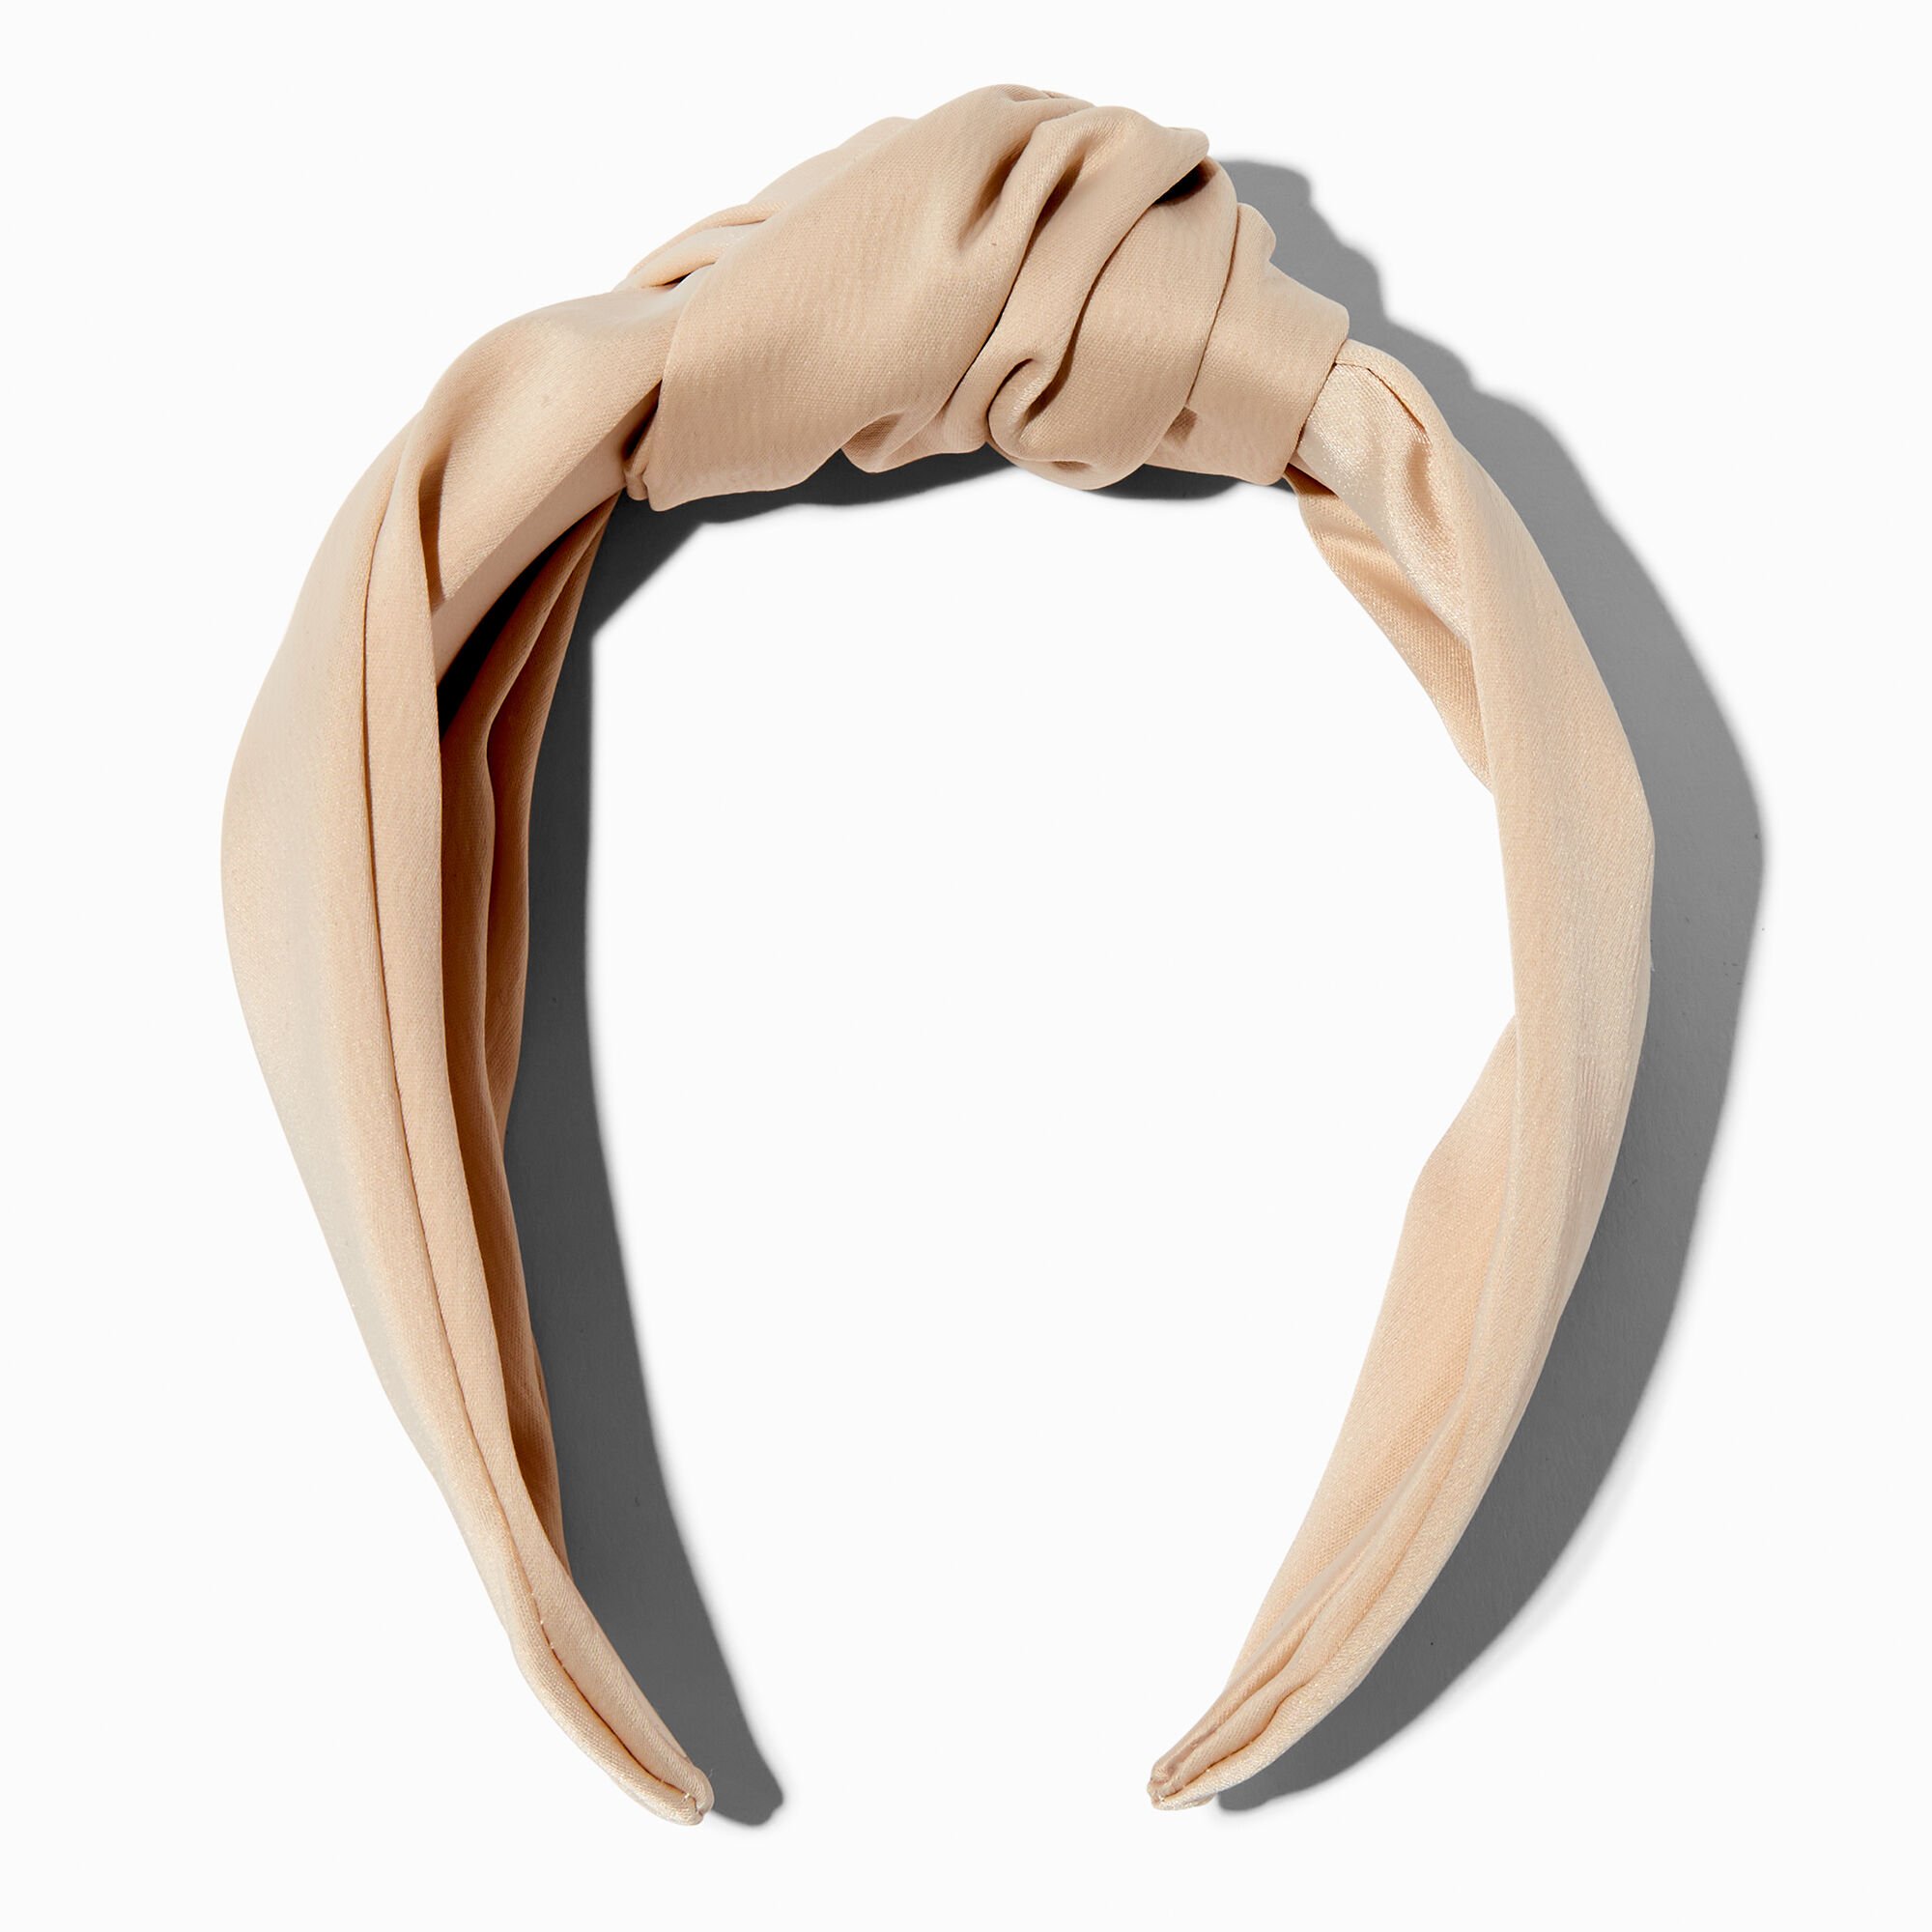 View Claires Nude Satin Knotted Headband information